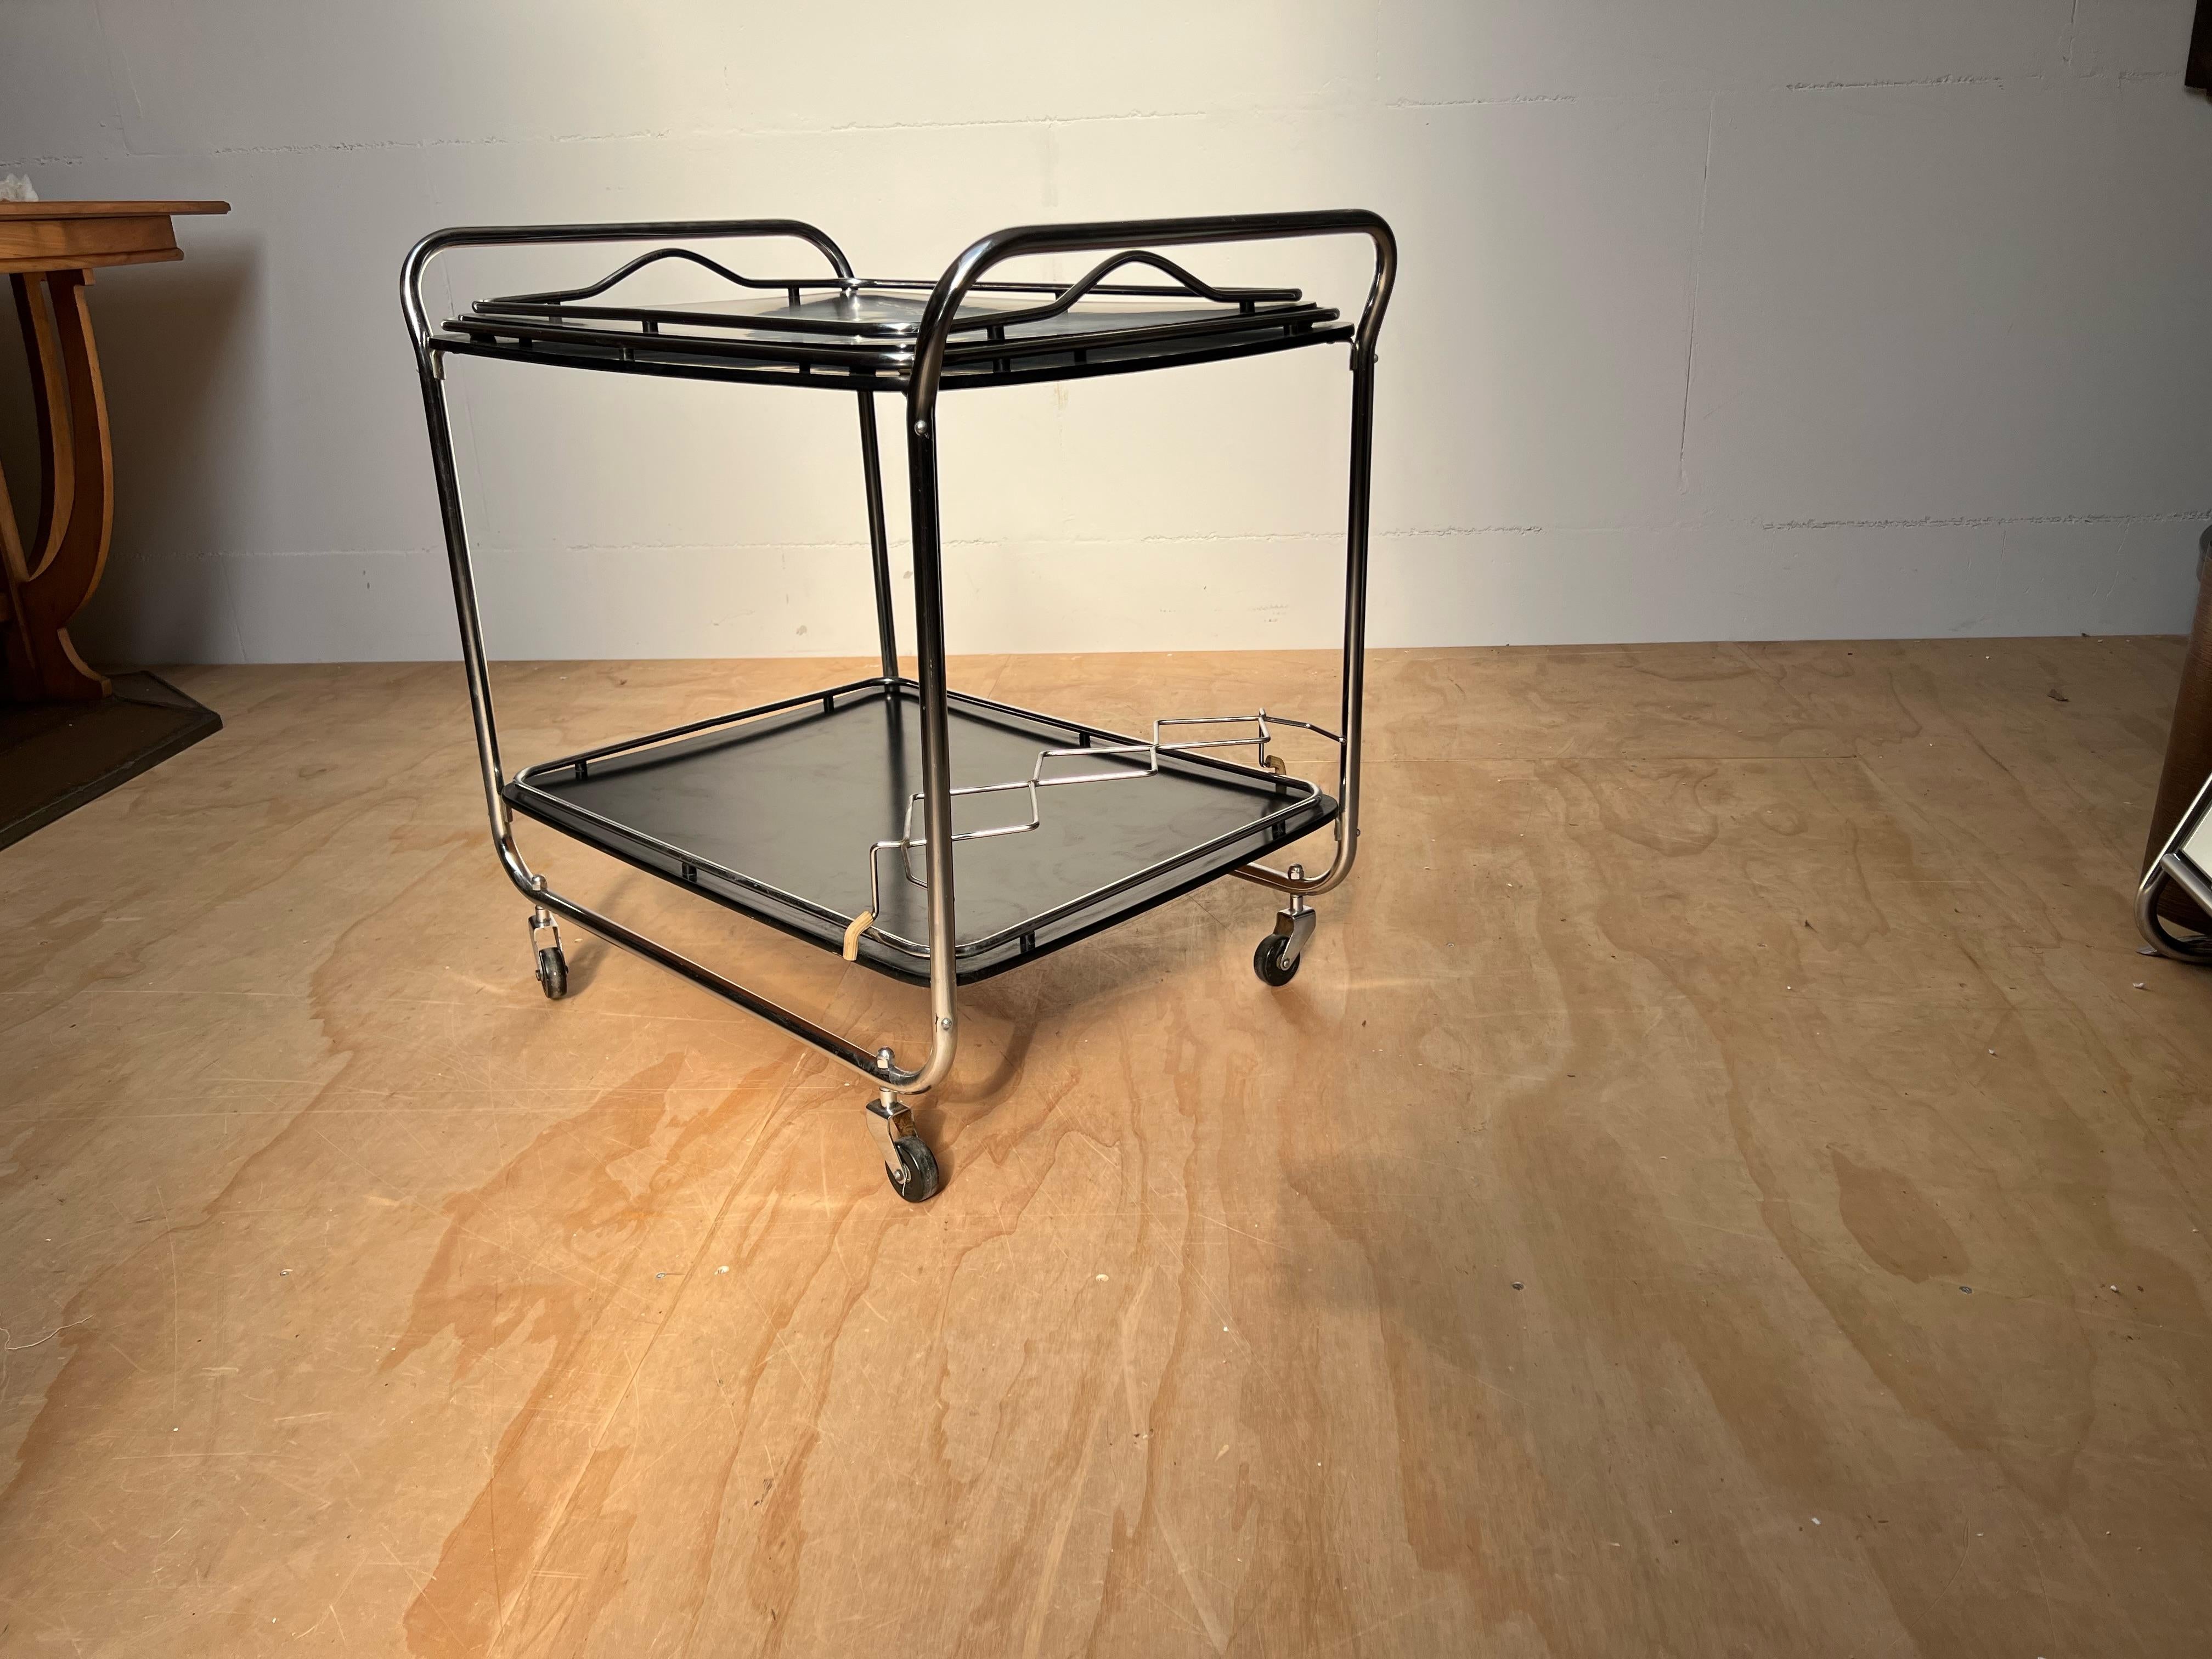 Midcentury Modern Drinks Trolley / Bar Cart w. Tray, Blackened Wood and Chrome For Sale 12